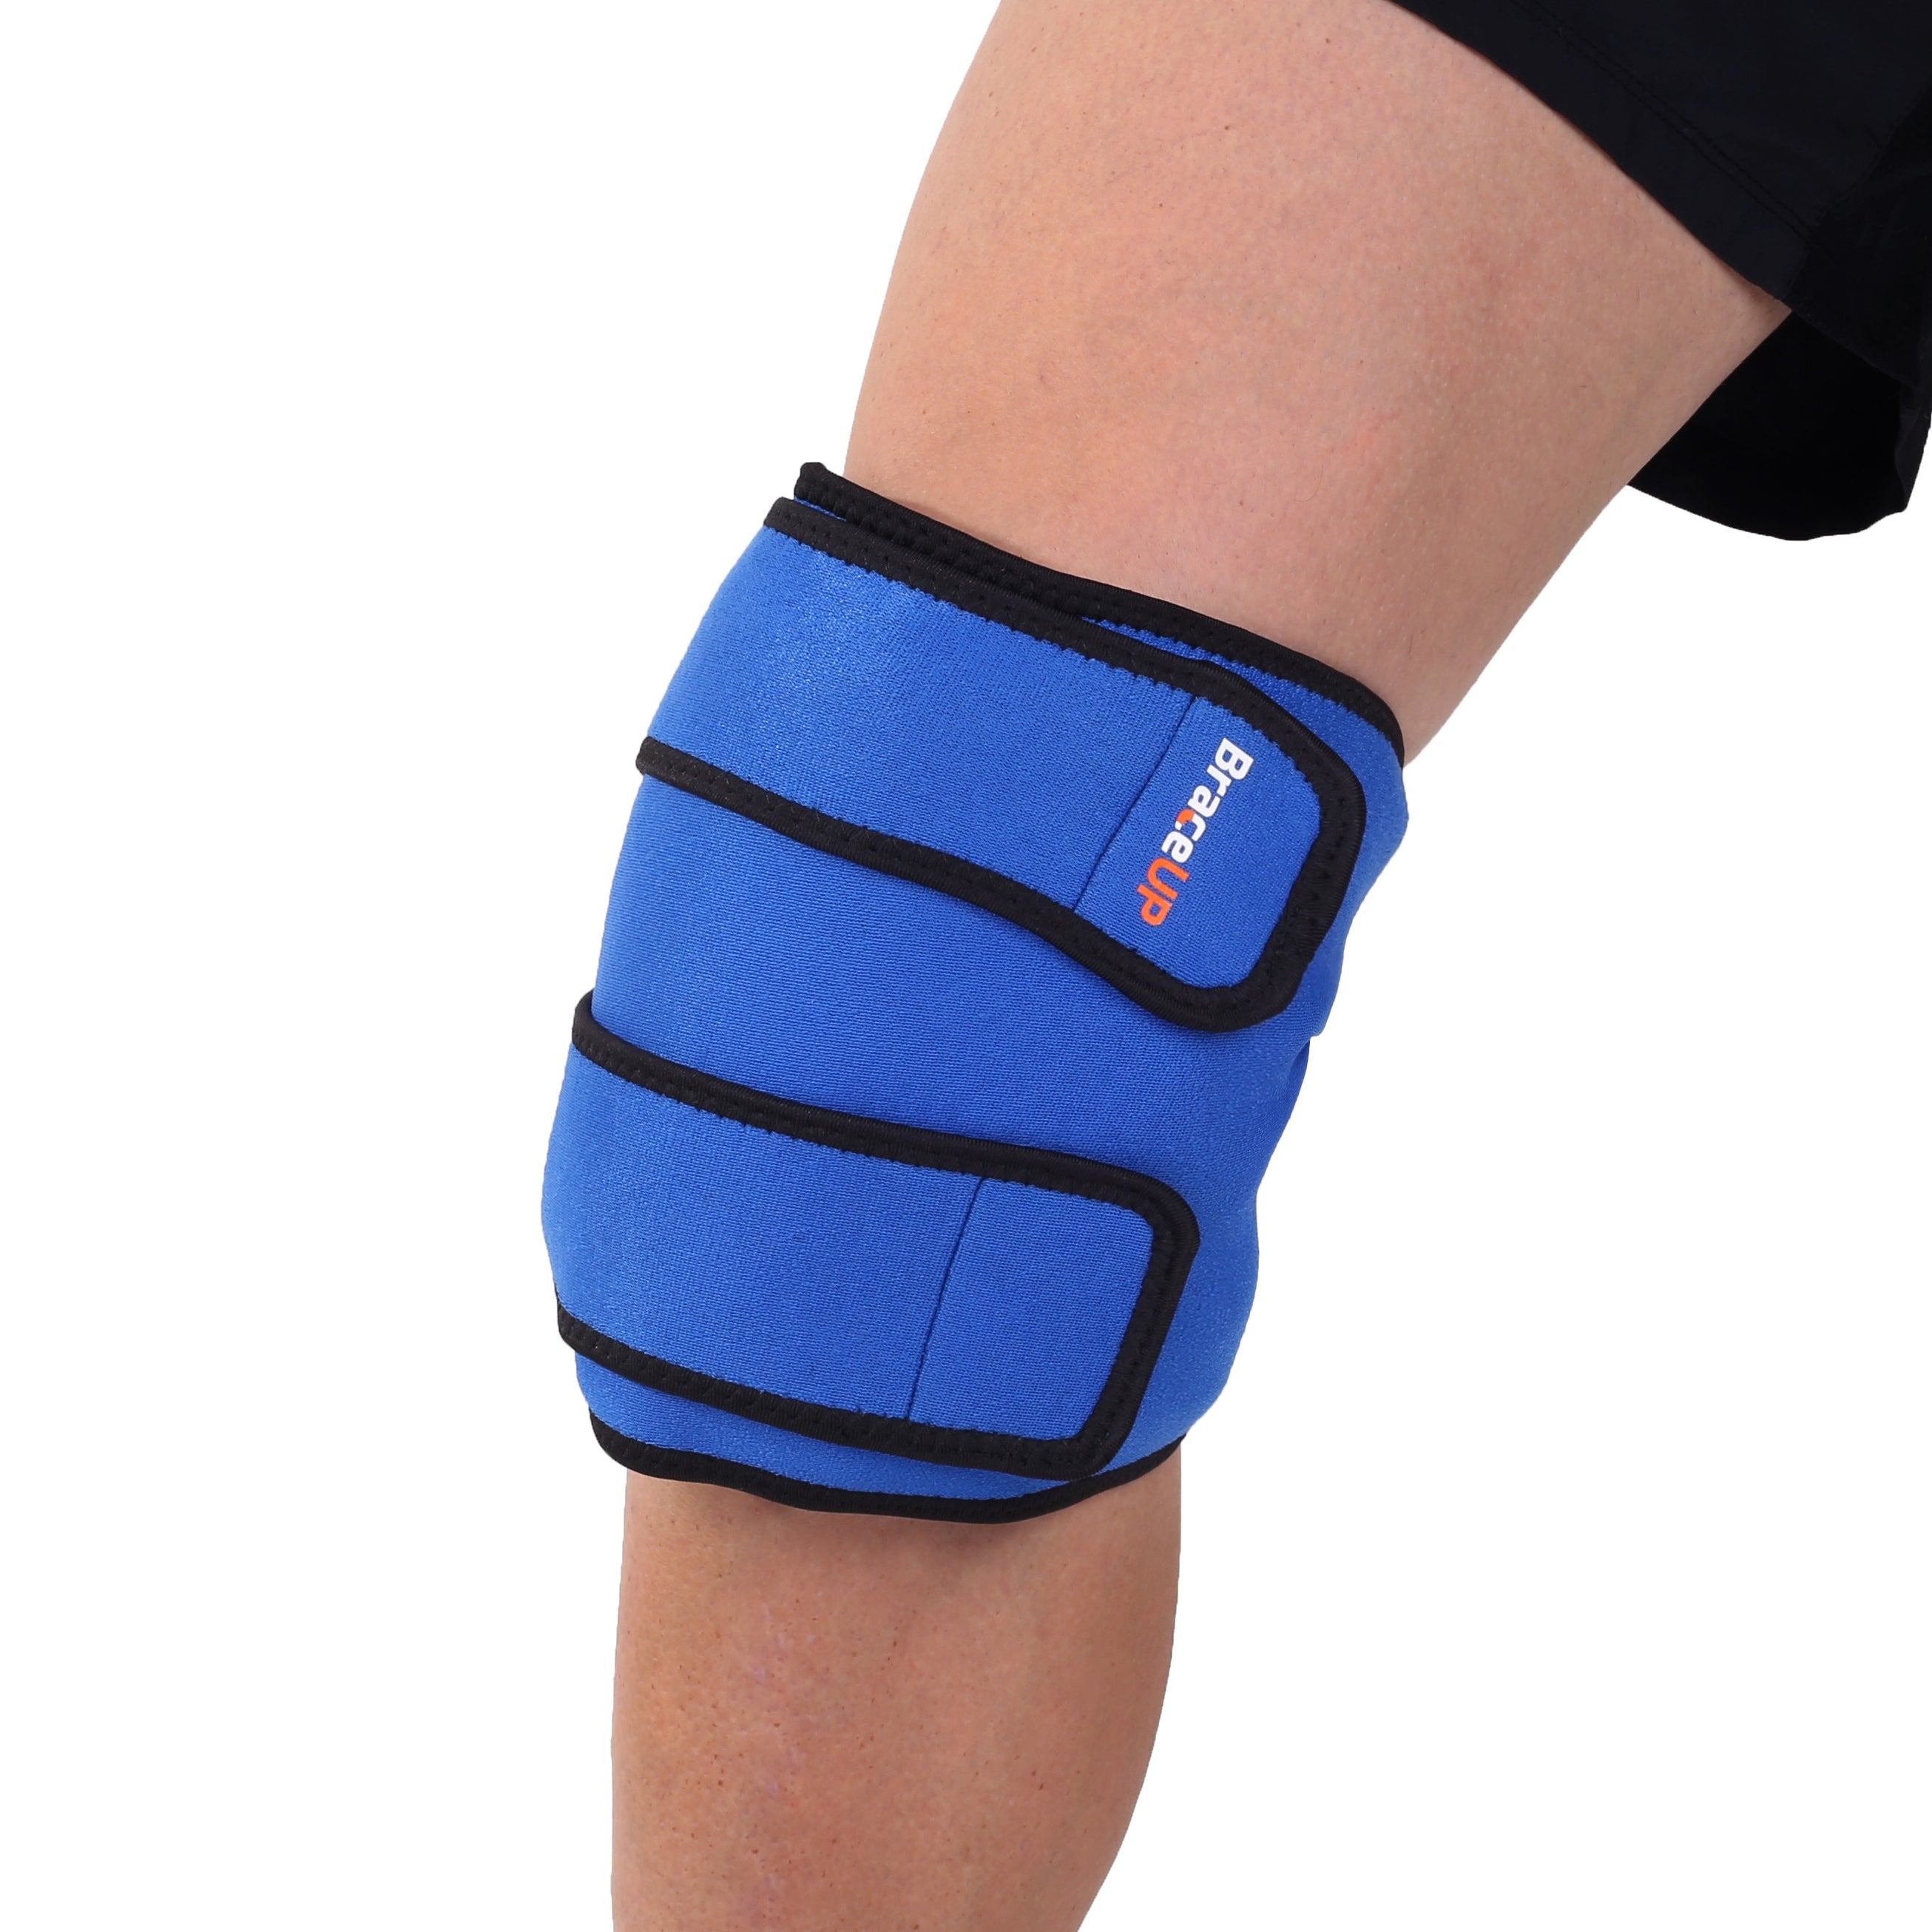  BraceUP® Reusable Hot and Cold Ice Knee Wrap